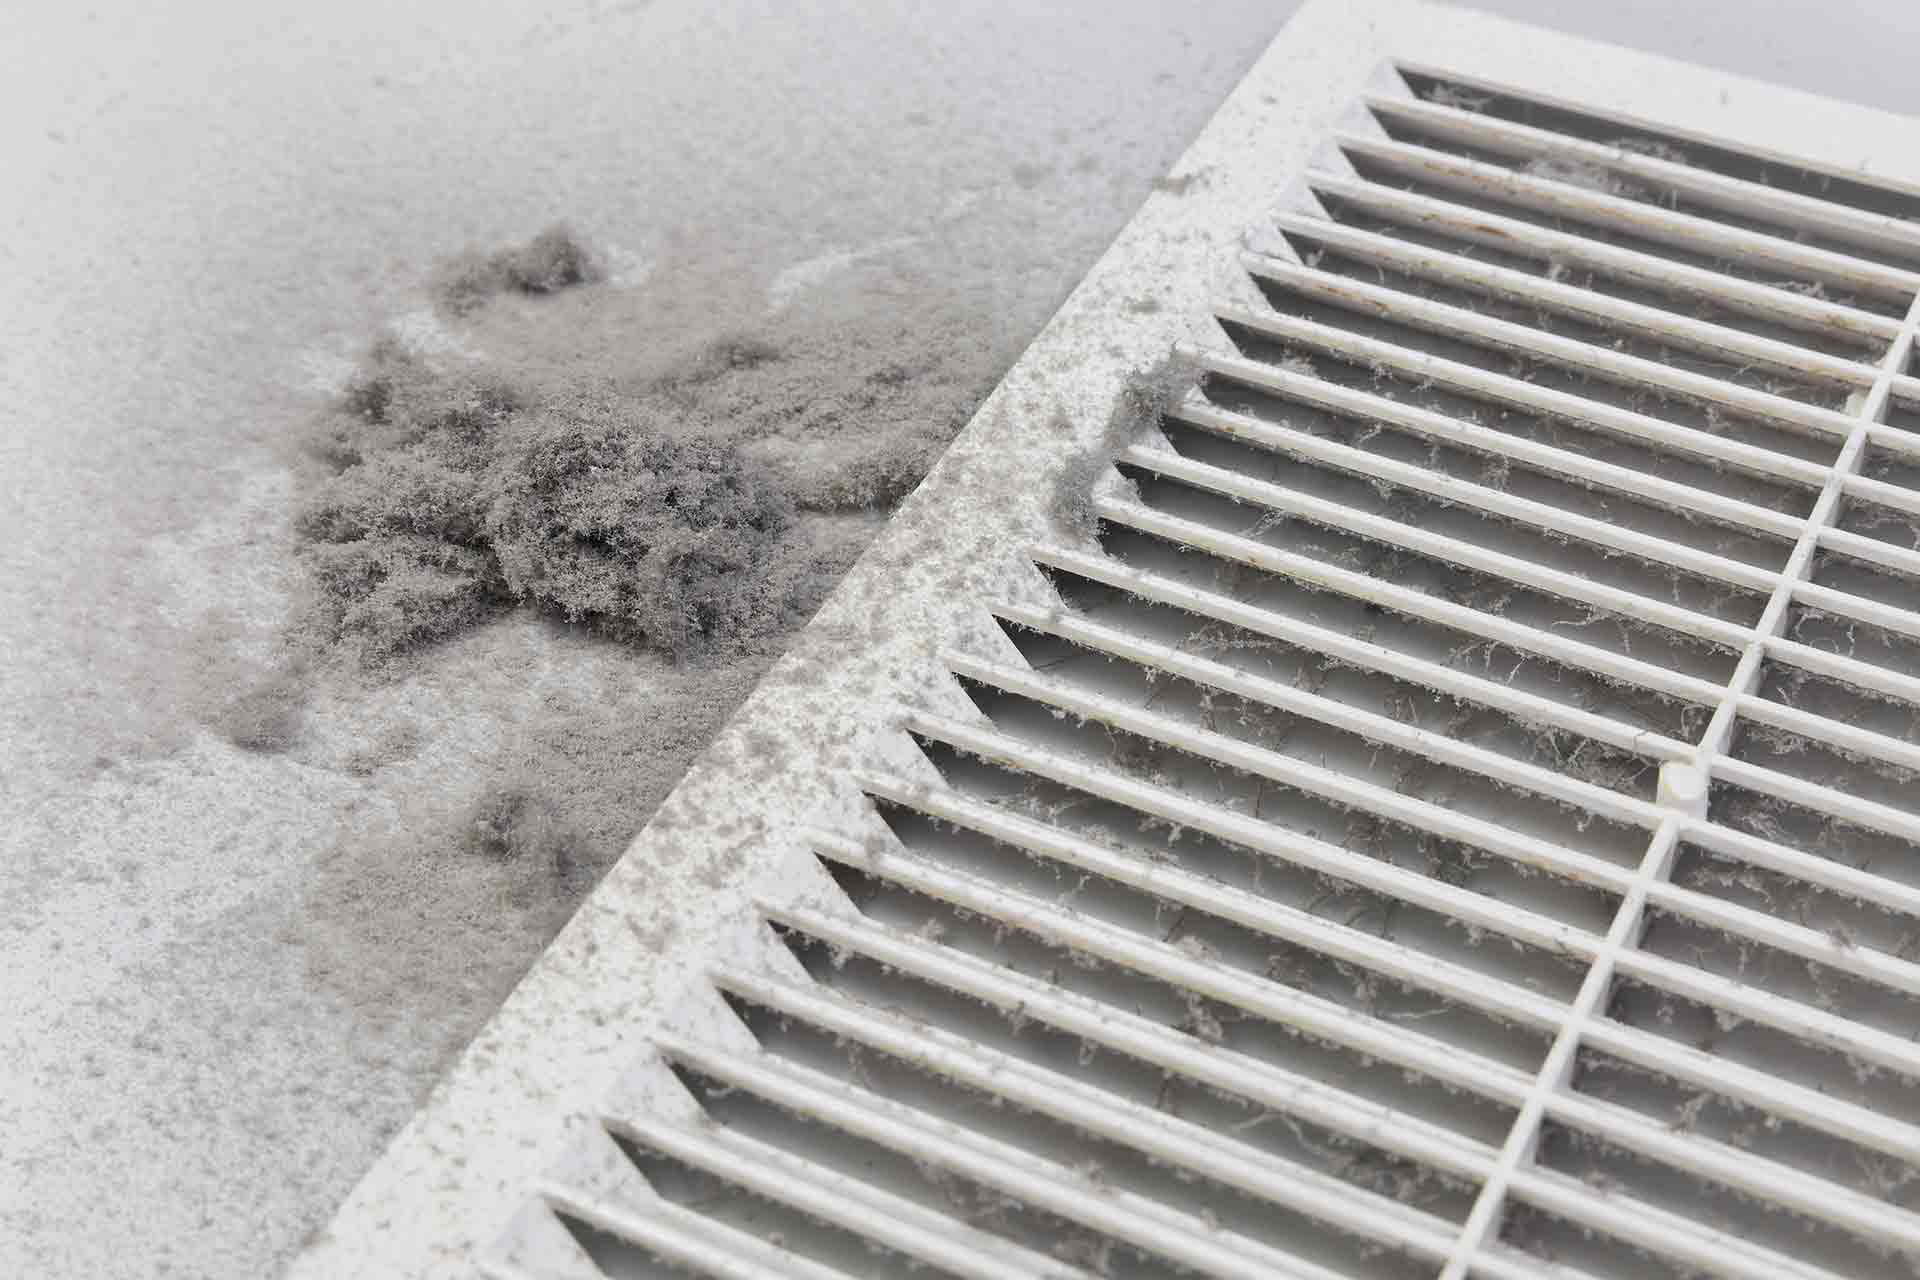 Potential Health Risks Associated with Dirty Air Ducts